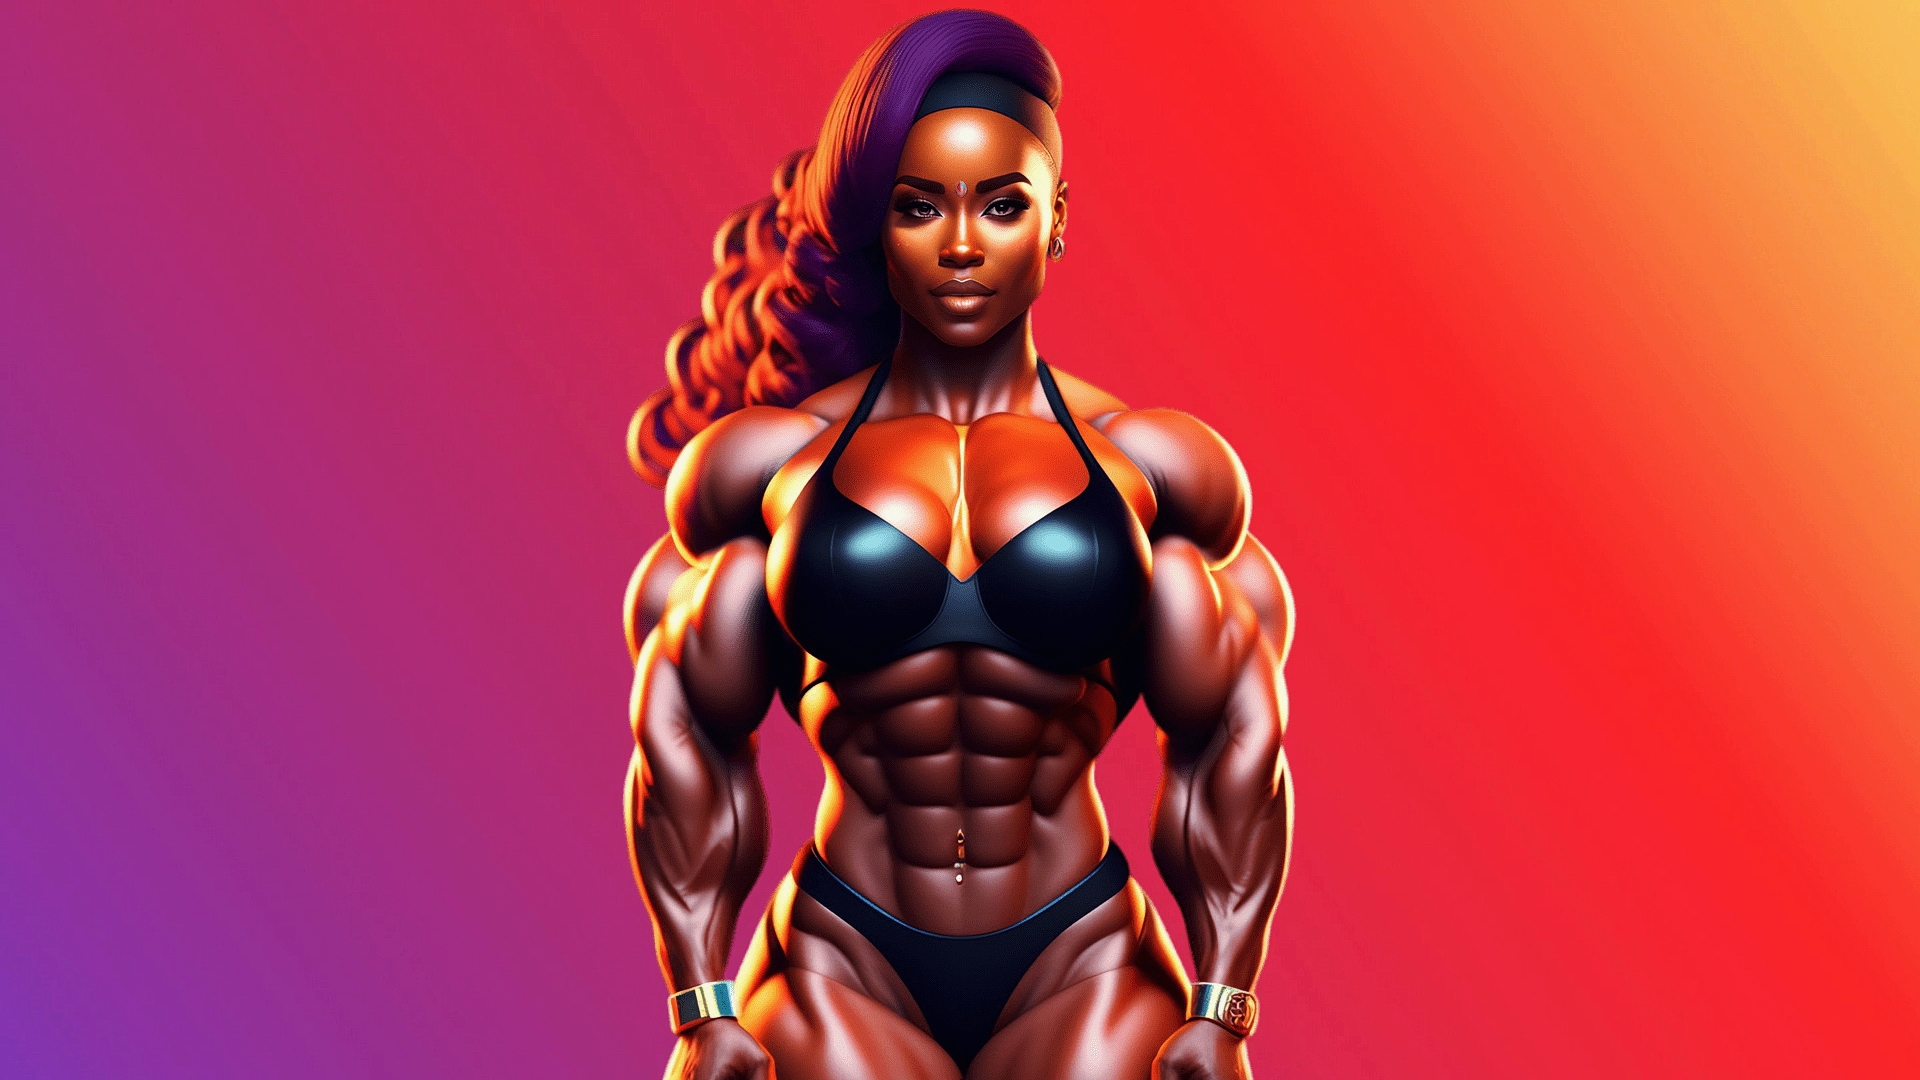 Body Builder Picture Background Images, HD Pictures and Wallpaper For Free  Download | Pngtree